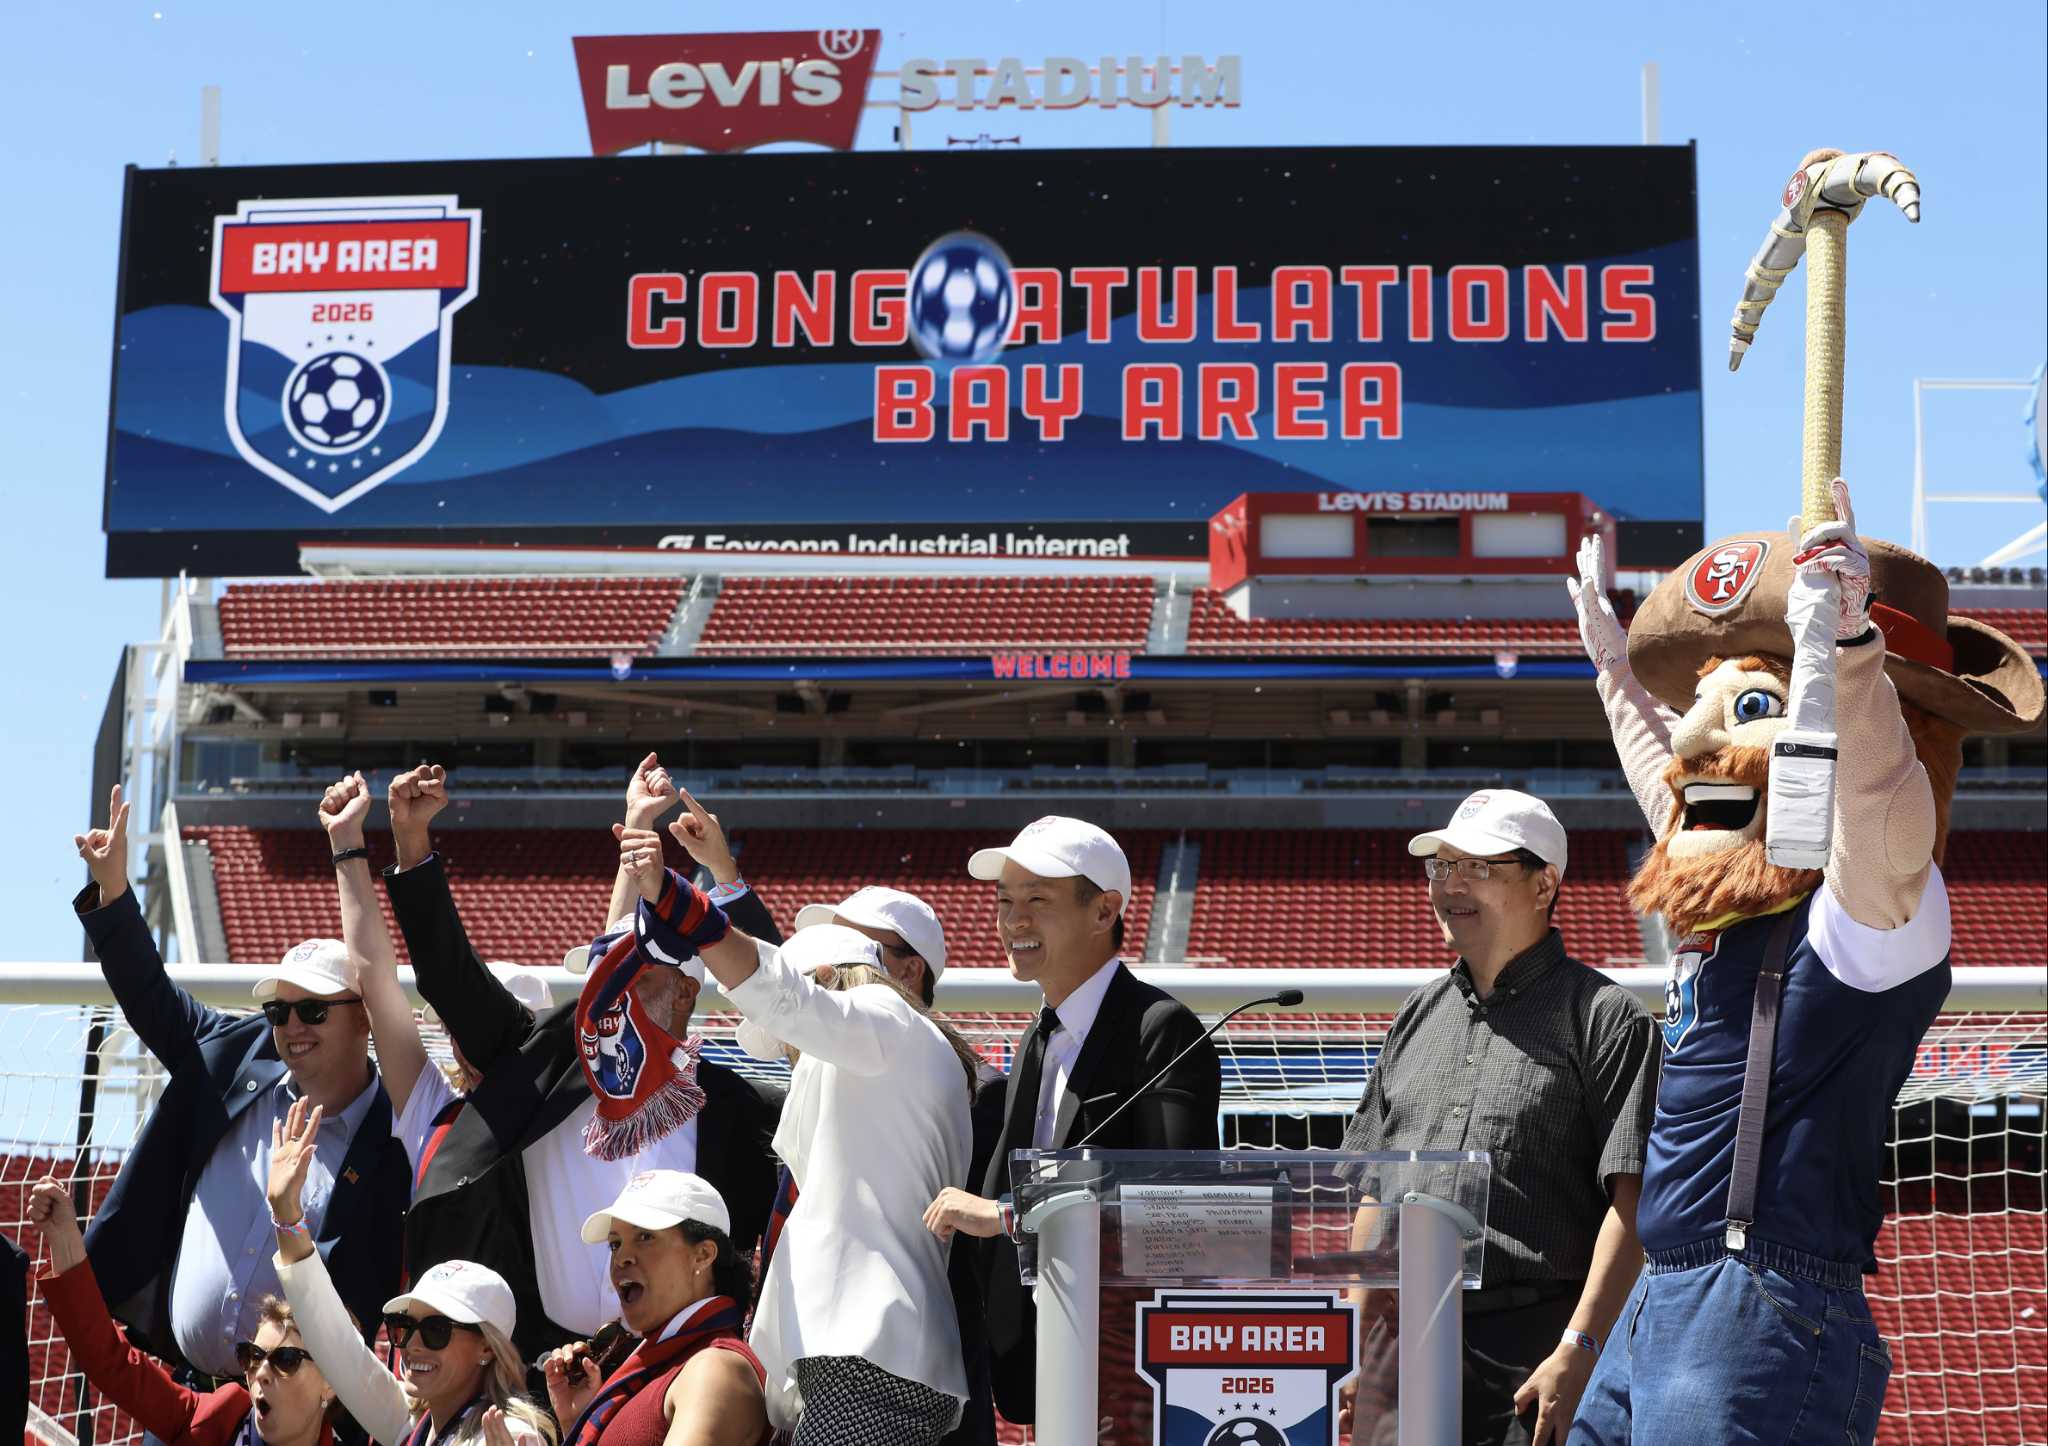 San Francisco Bay Area, Levi’s Stadium selected to Host FIFA World Cup in 2026